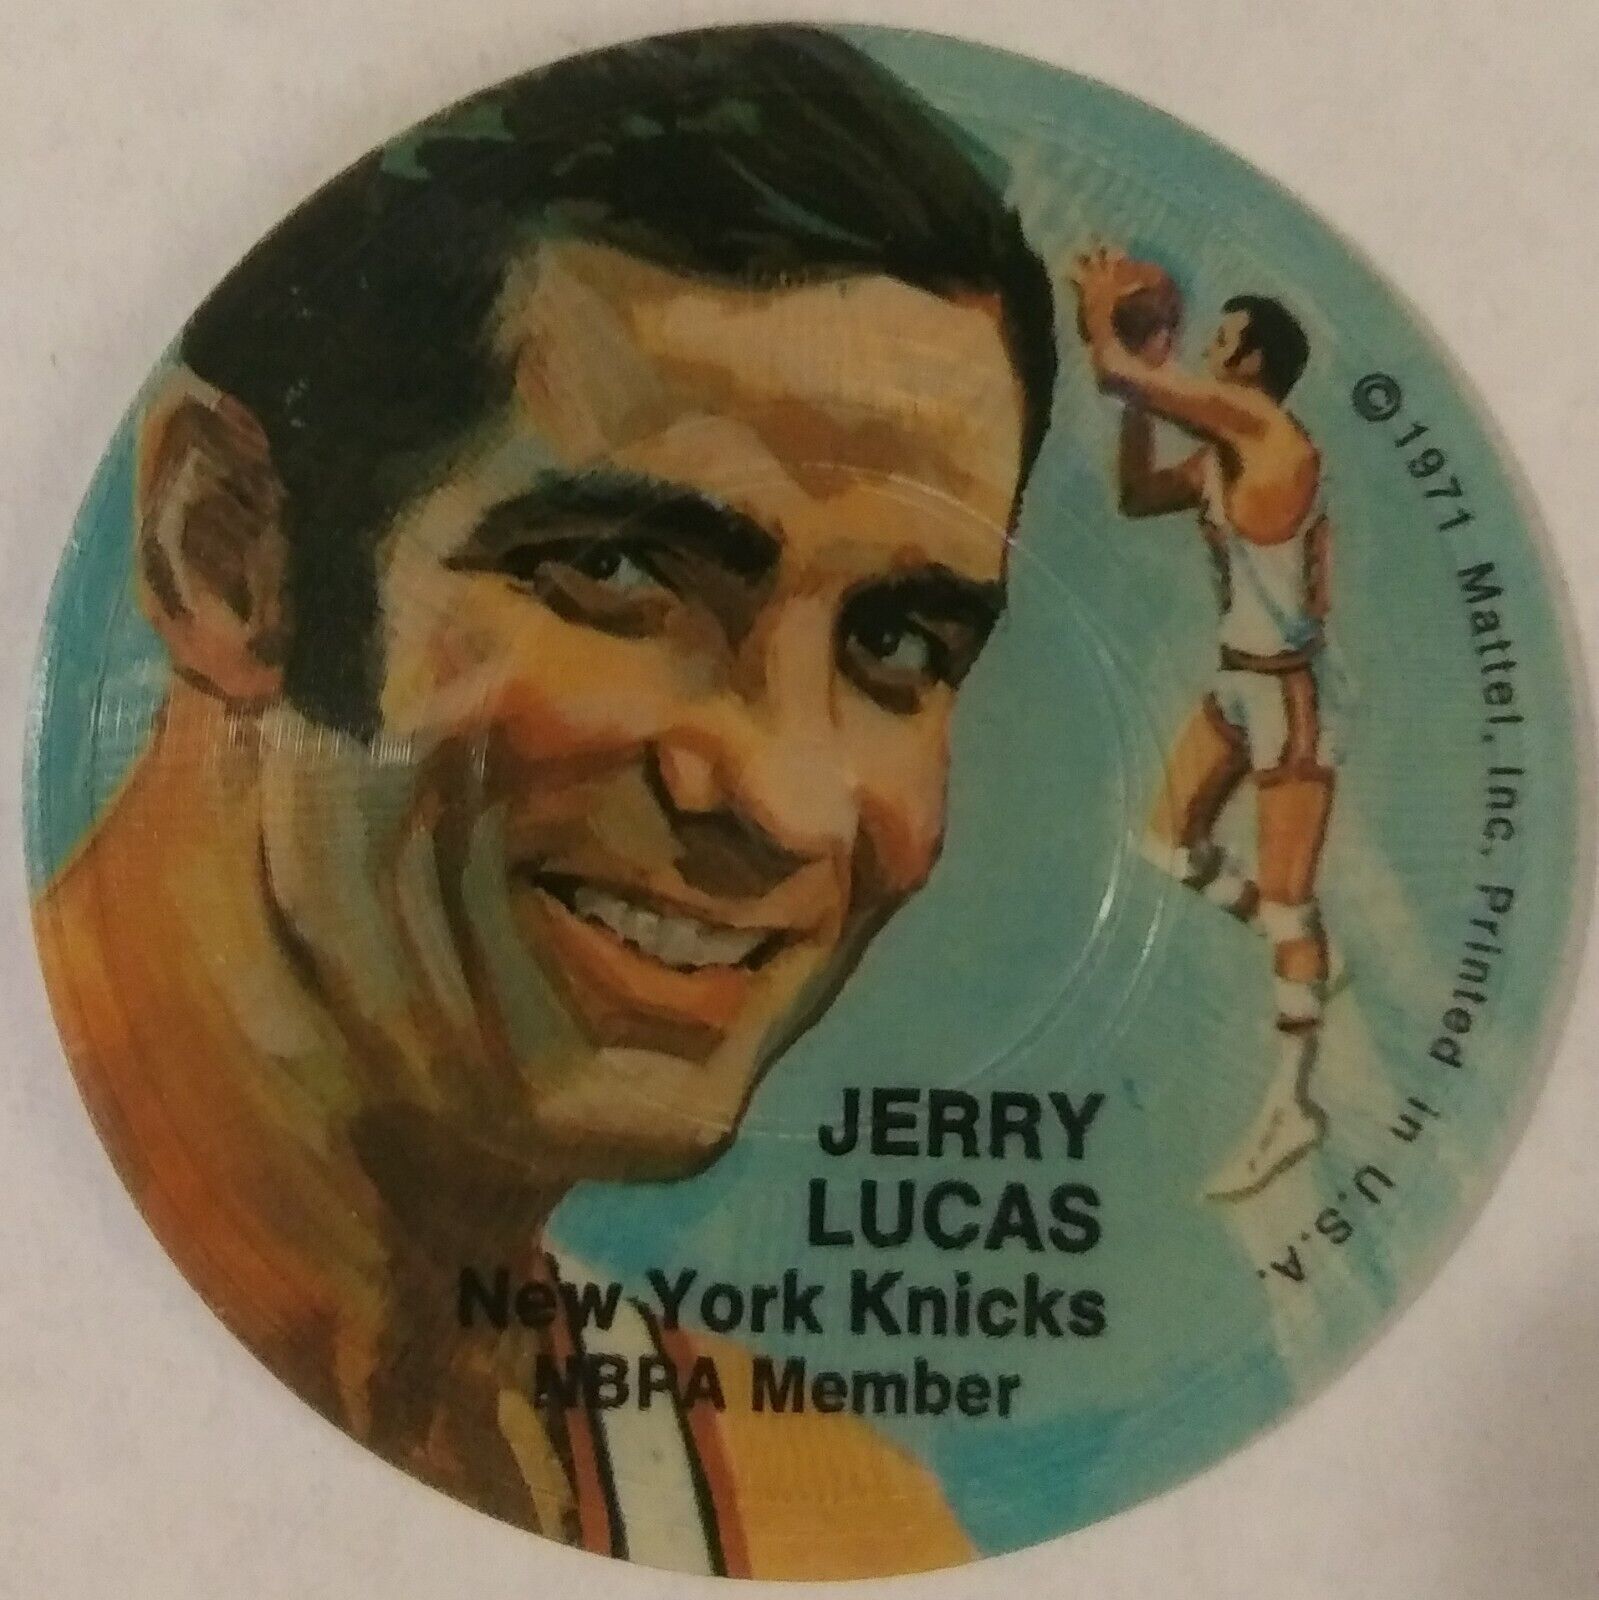 1971 Mattel Instant Replay JERRY LUCAS Double-Sided Mini Record (A) - UNPLAYED